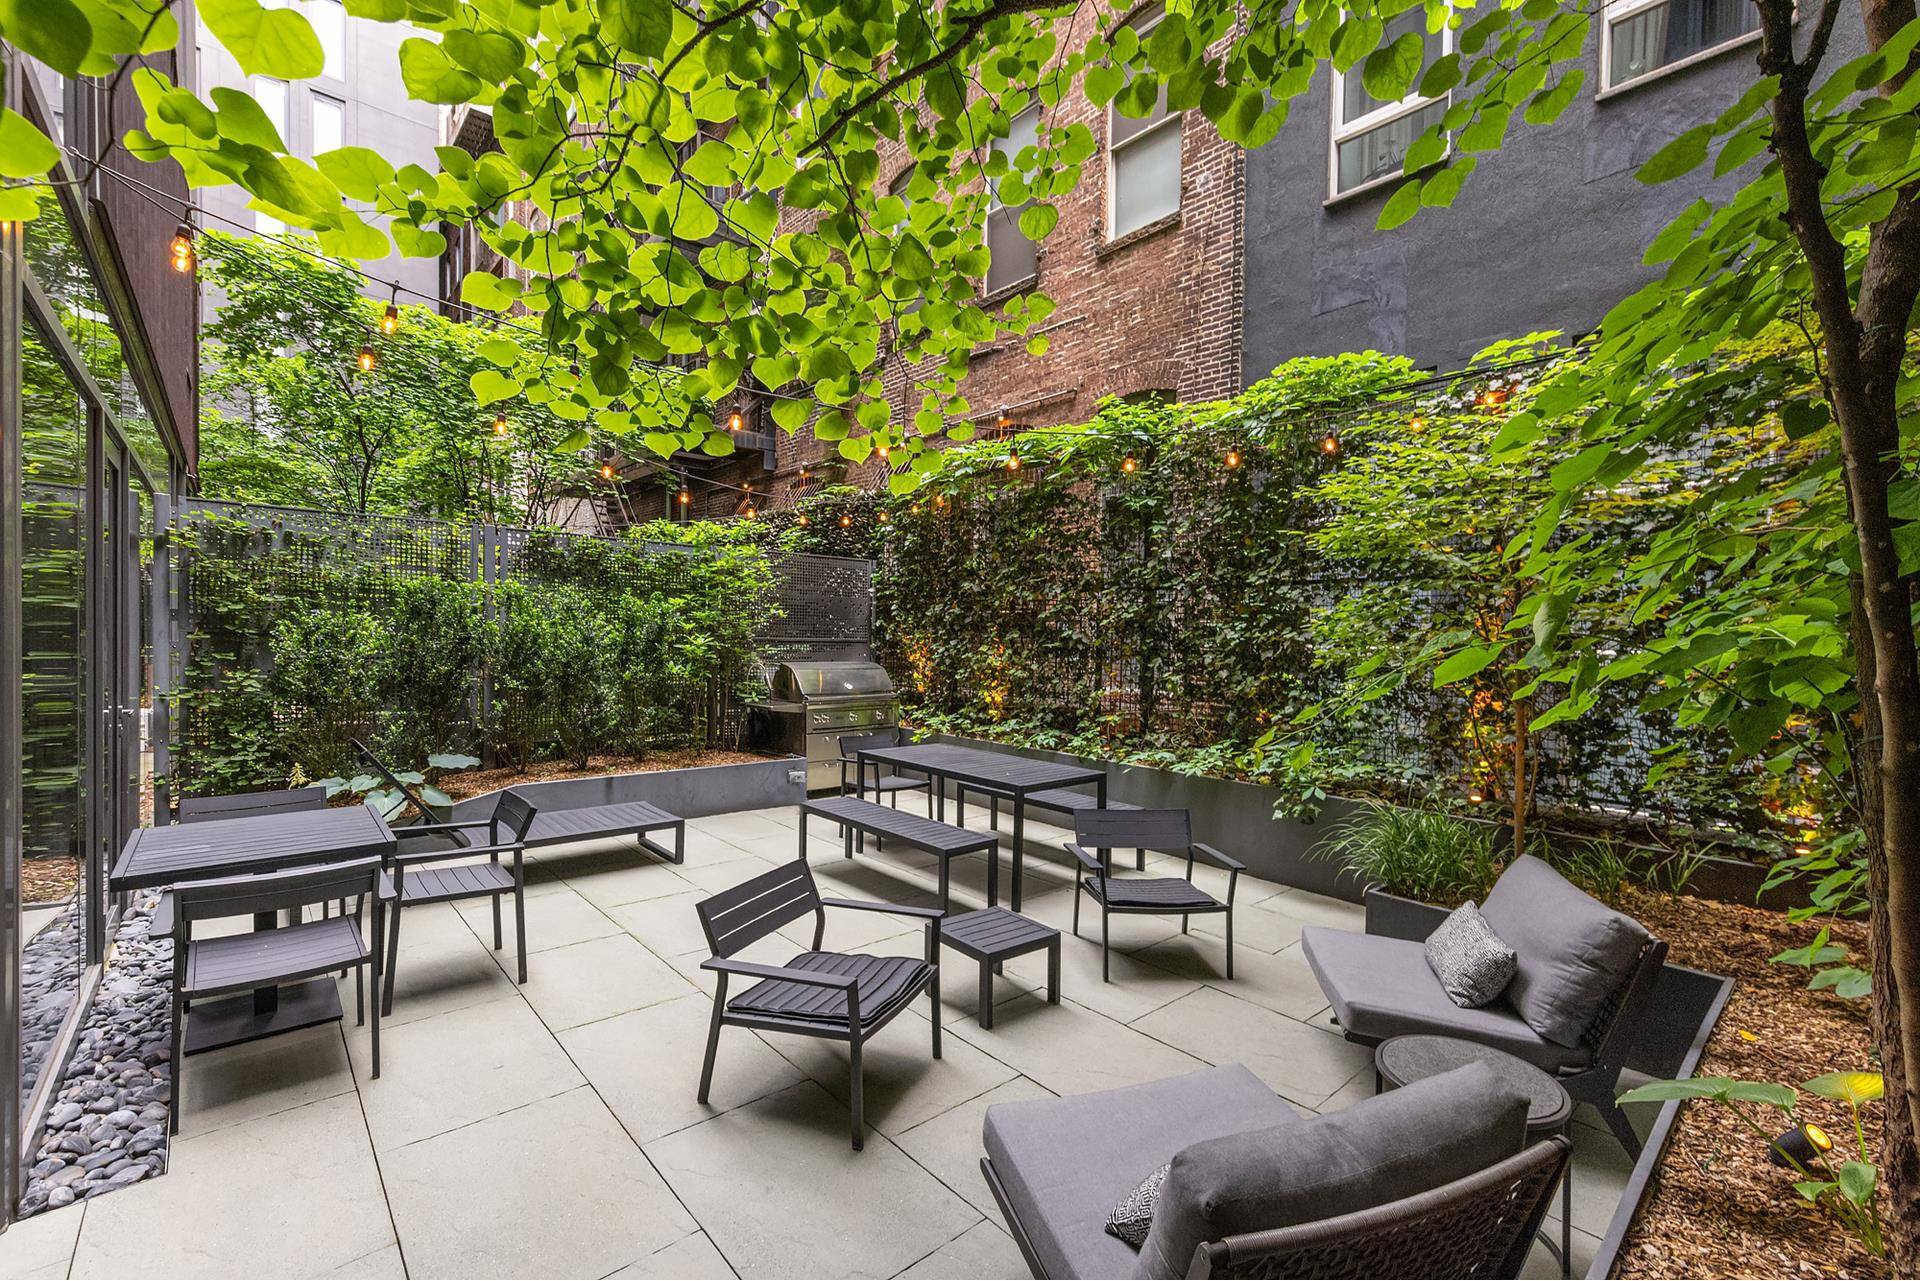 Enter this extremely rare double height 3, 516 square foot triplex featuring 20 foot ceilings and a beautifully 732 square foot landscaped garden.